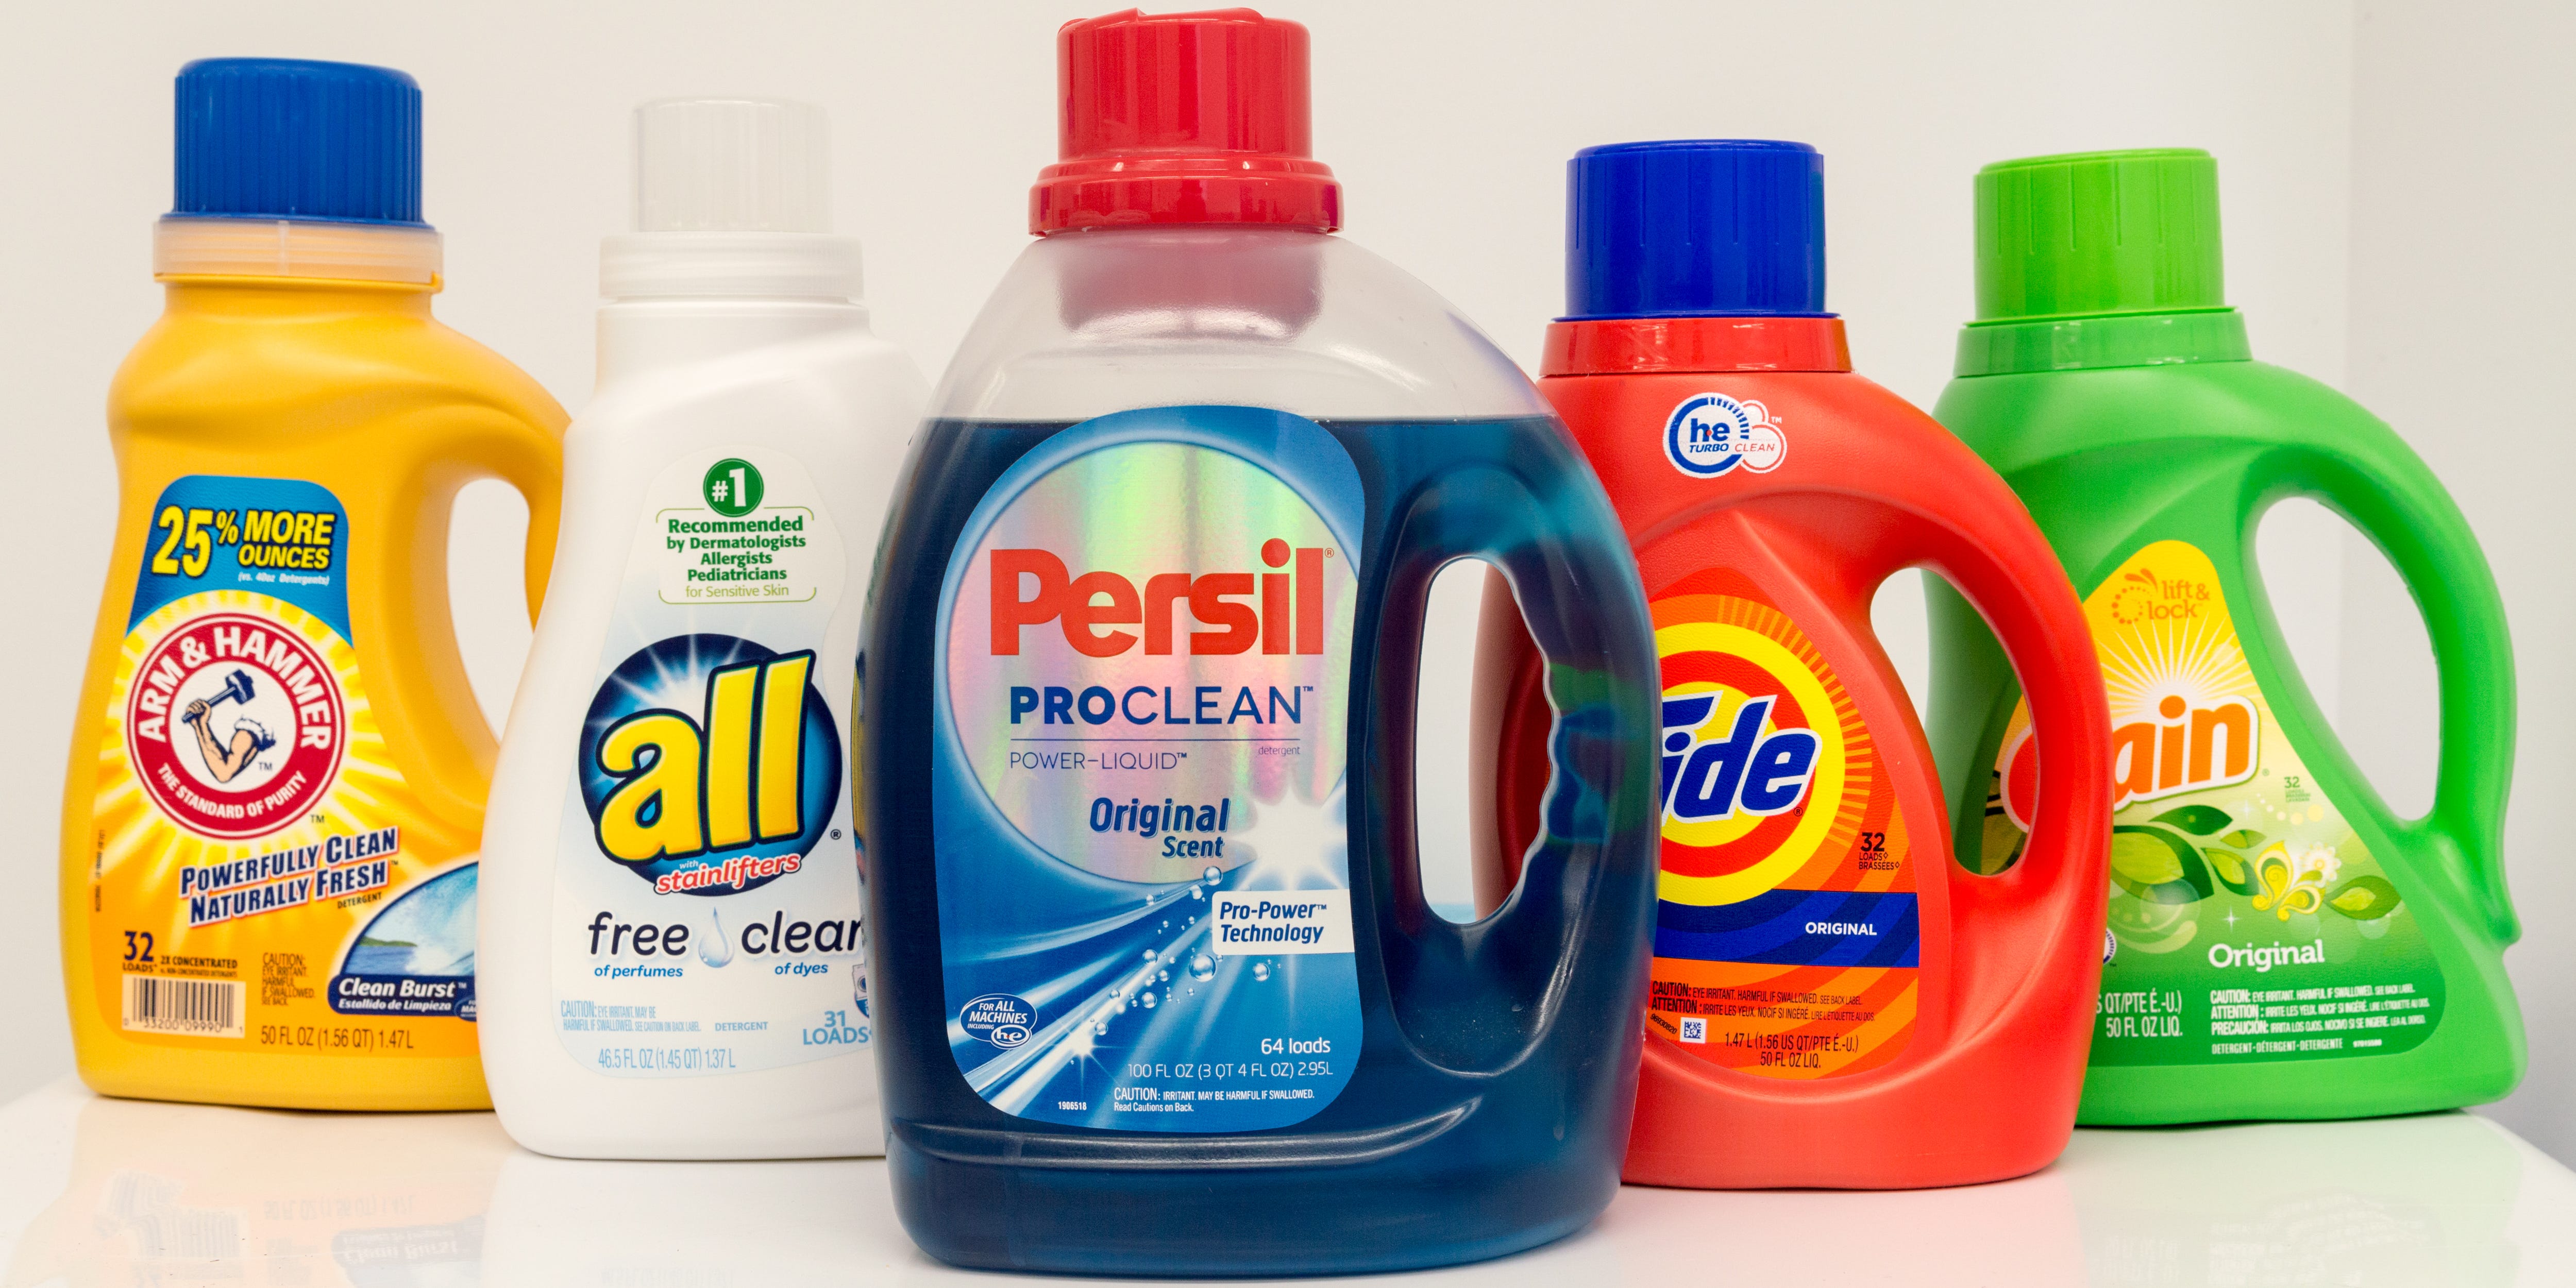 The 5 best laundry detergents you can buy